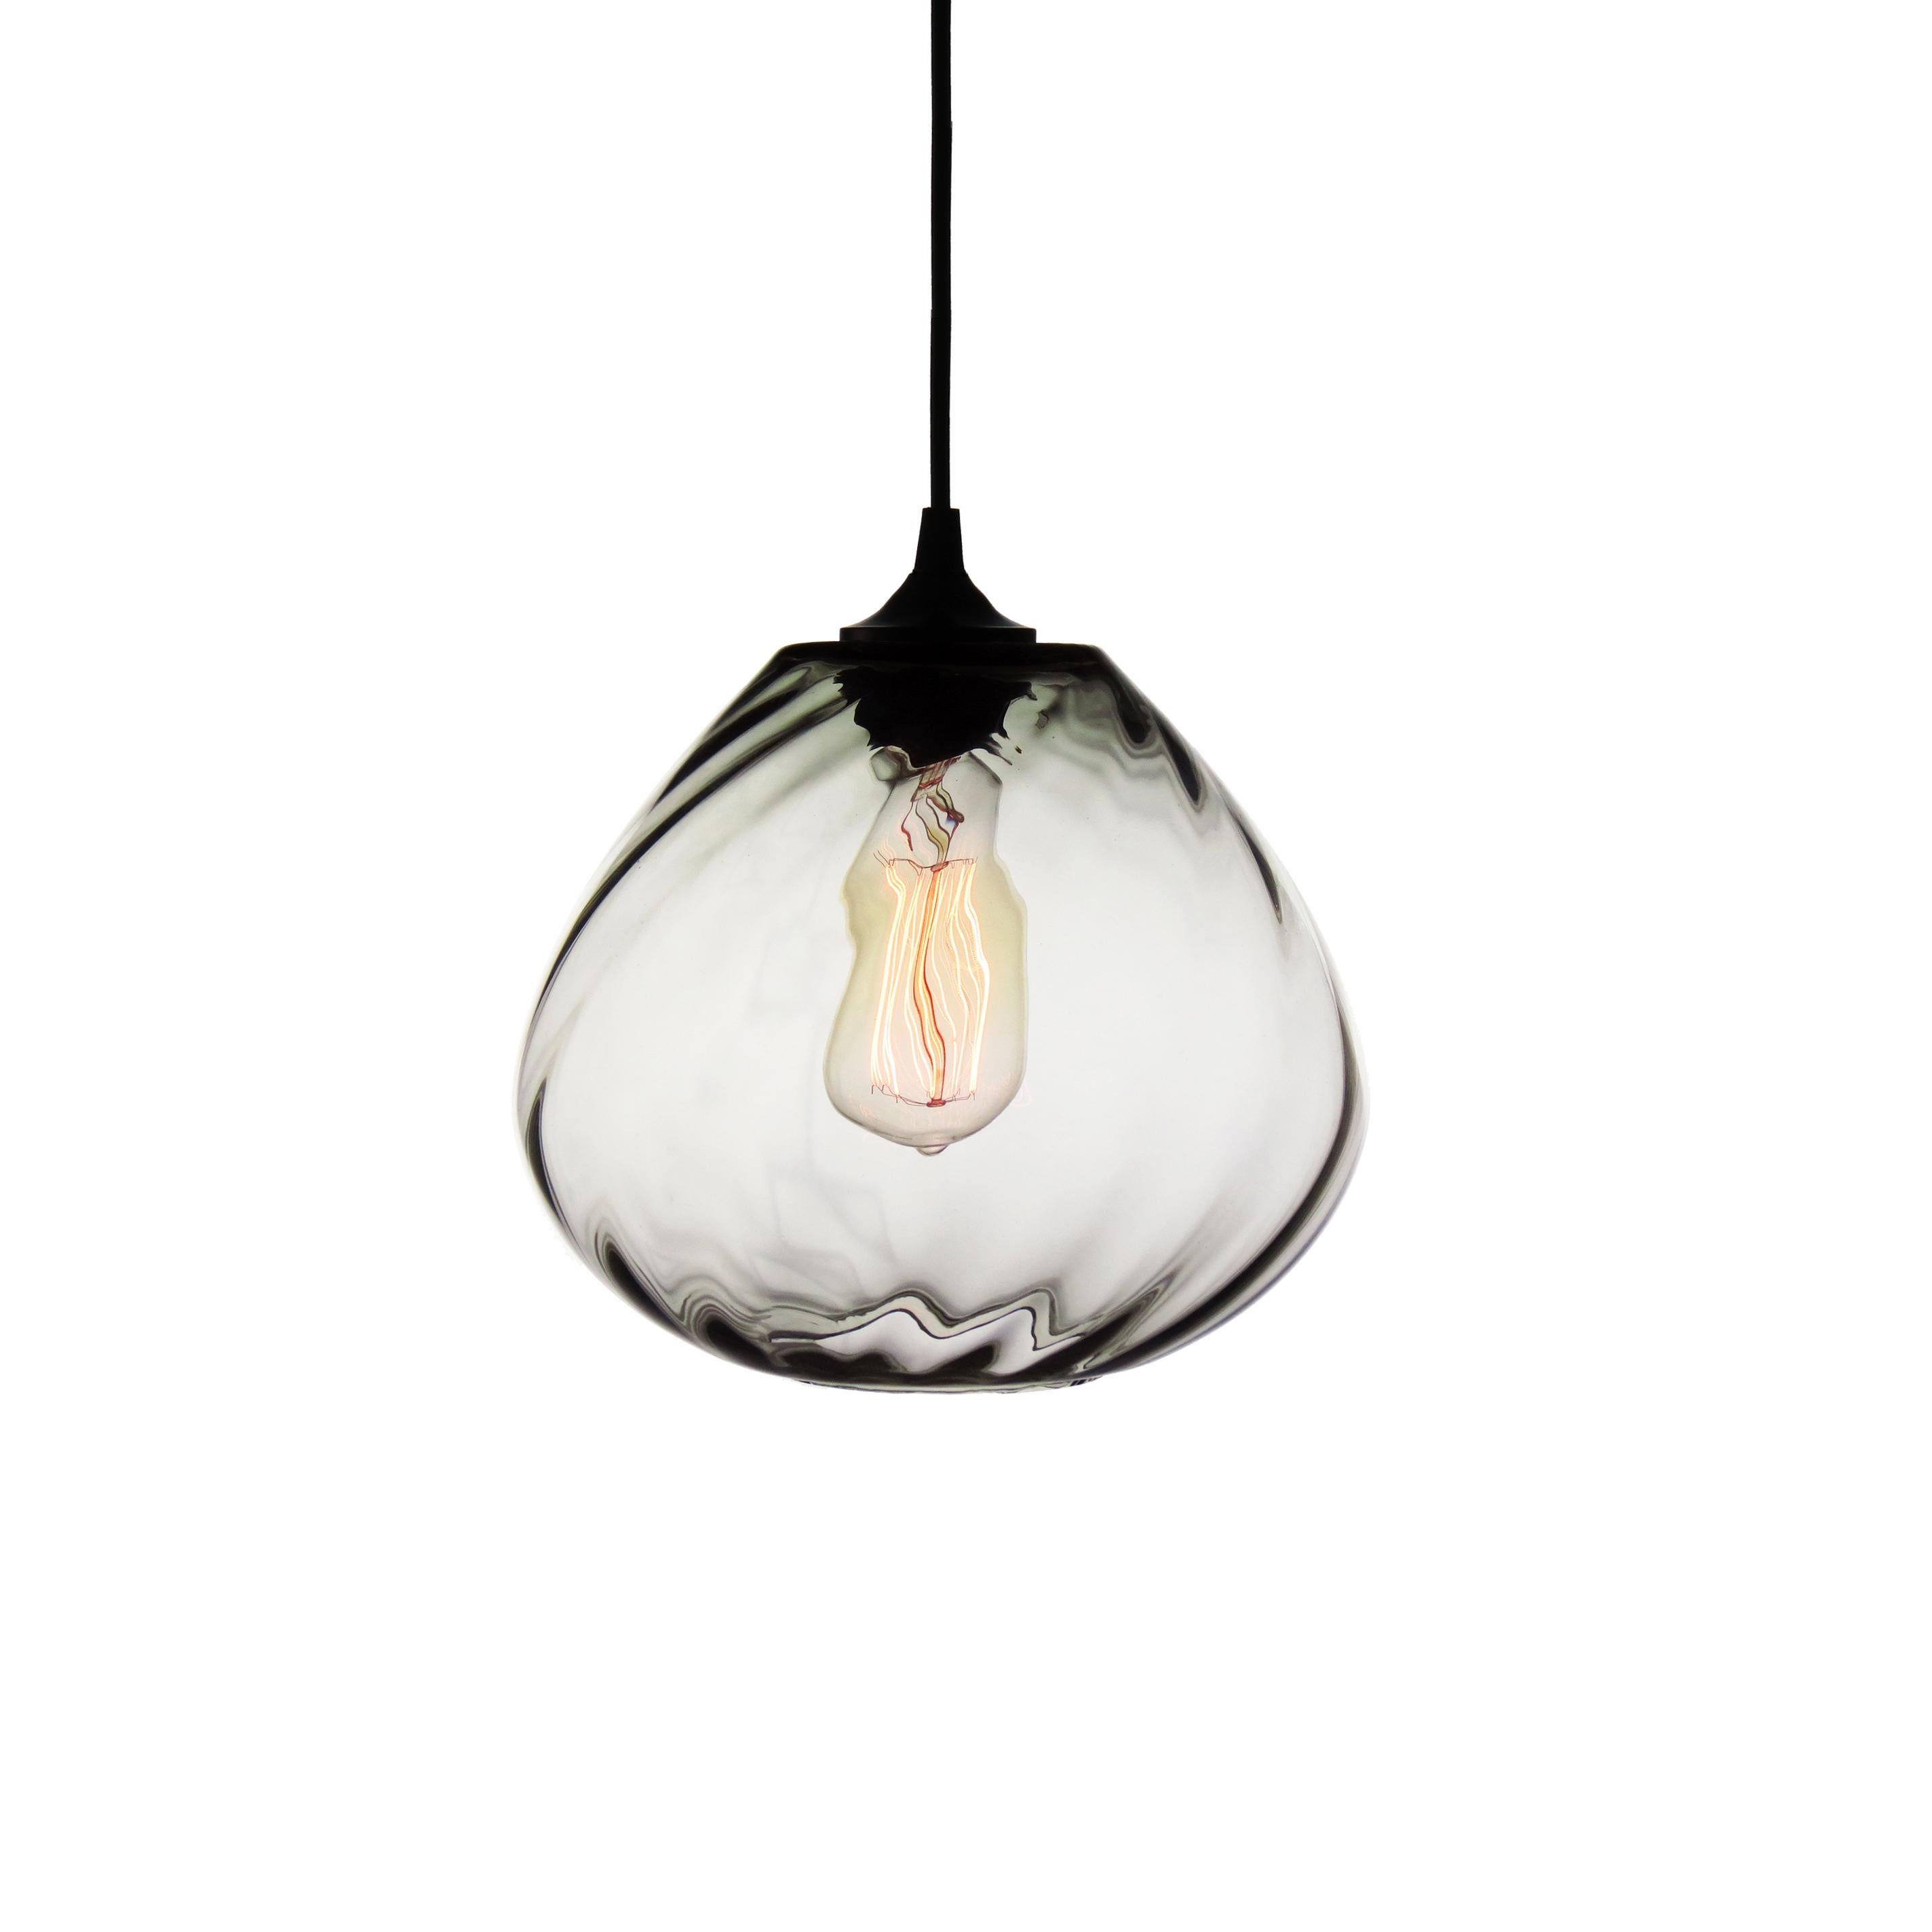 Golden Olive Modern Transparent Hand Blown Glass Architectural Pendant Lamp For Sale 3